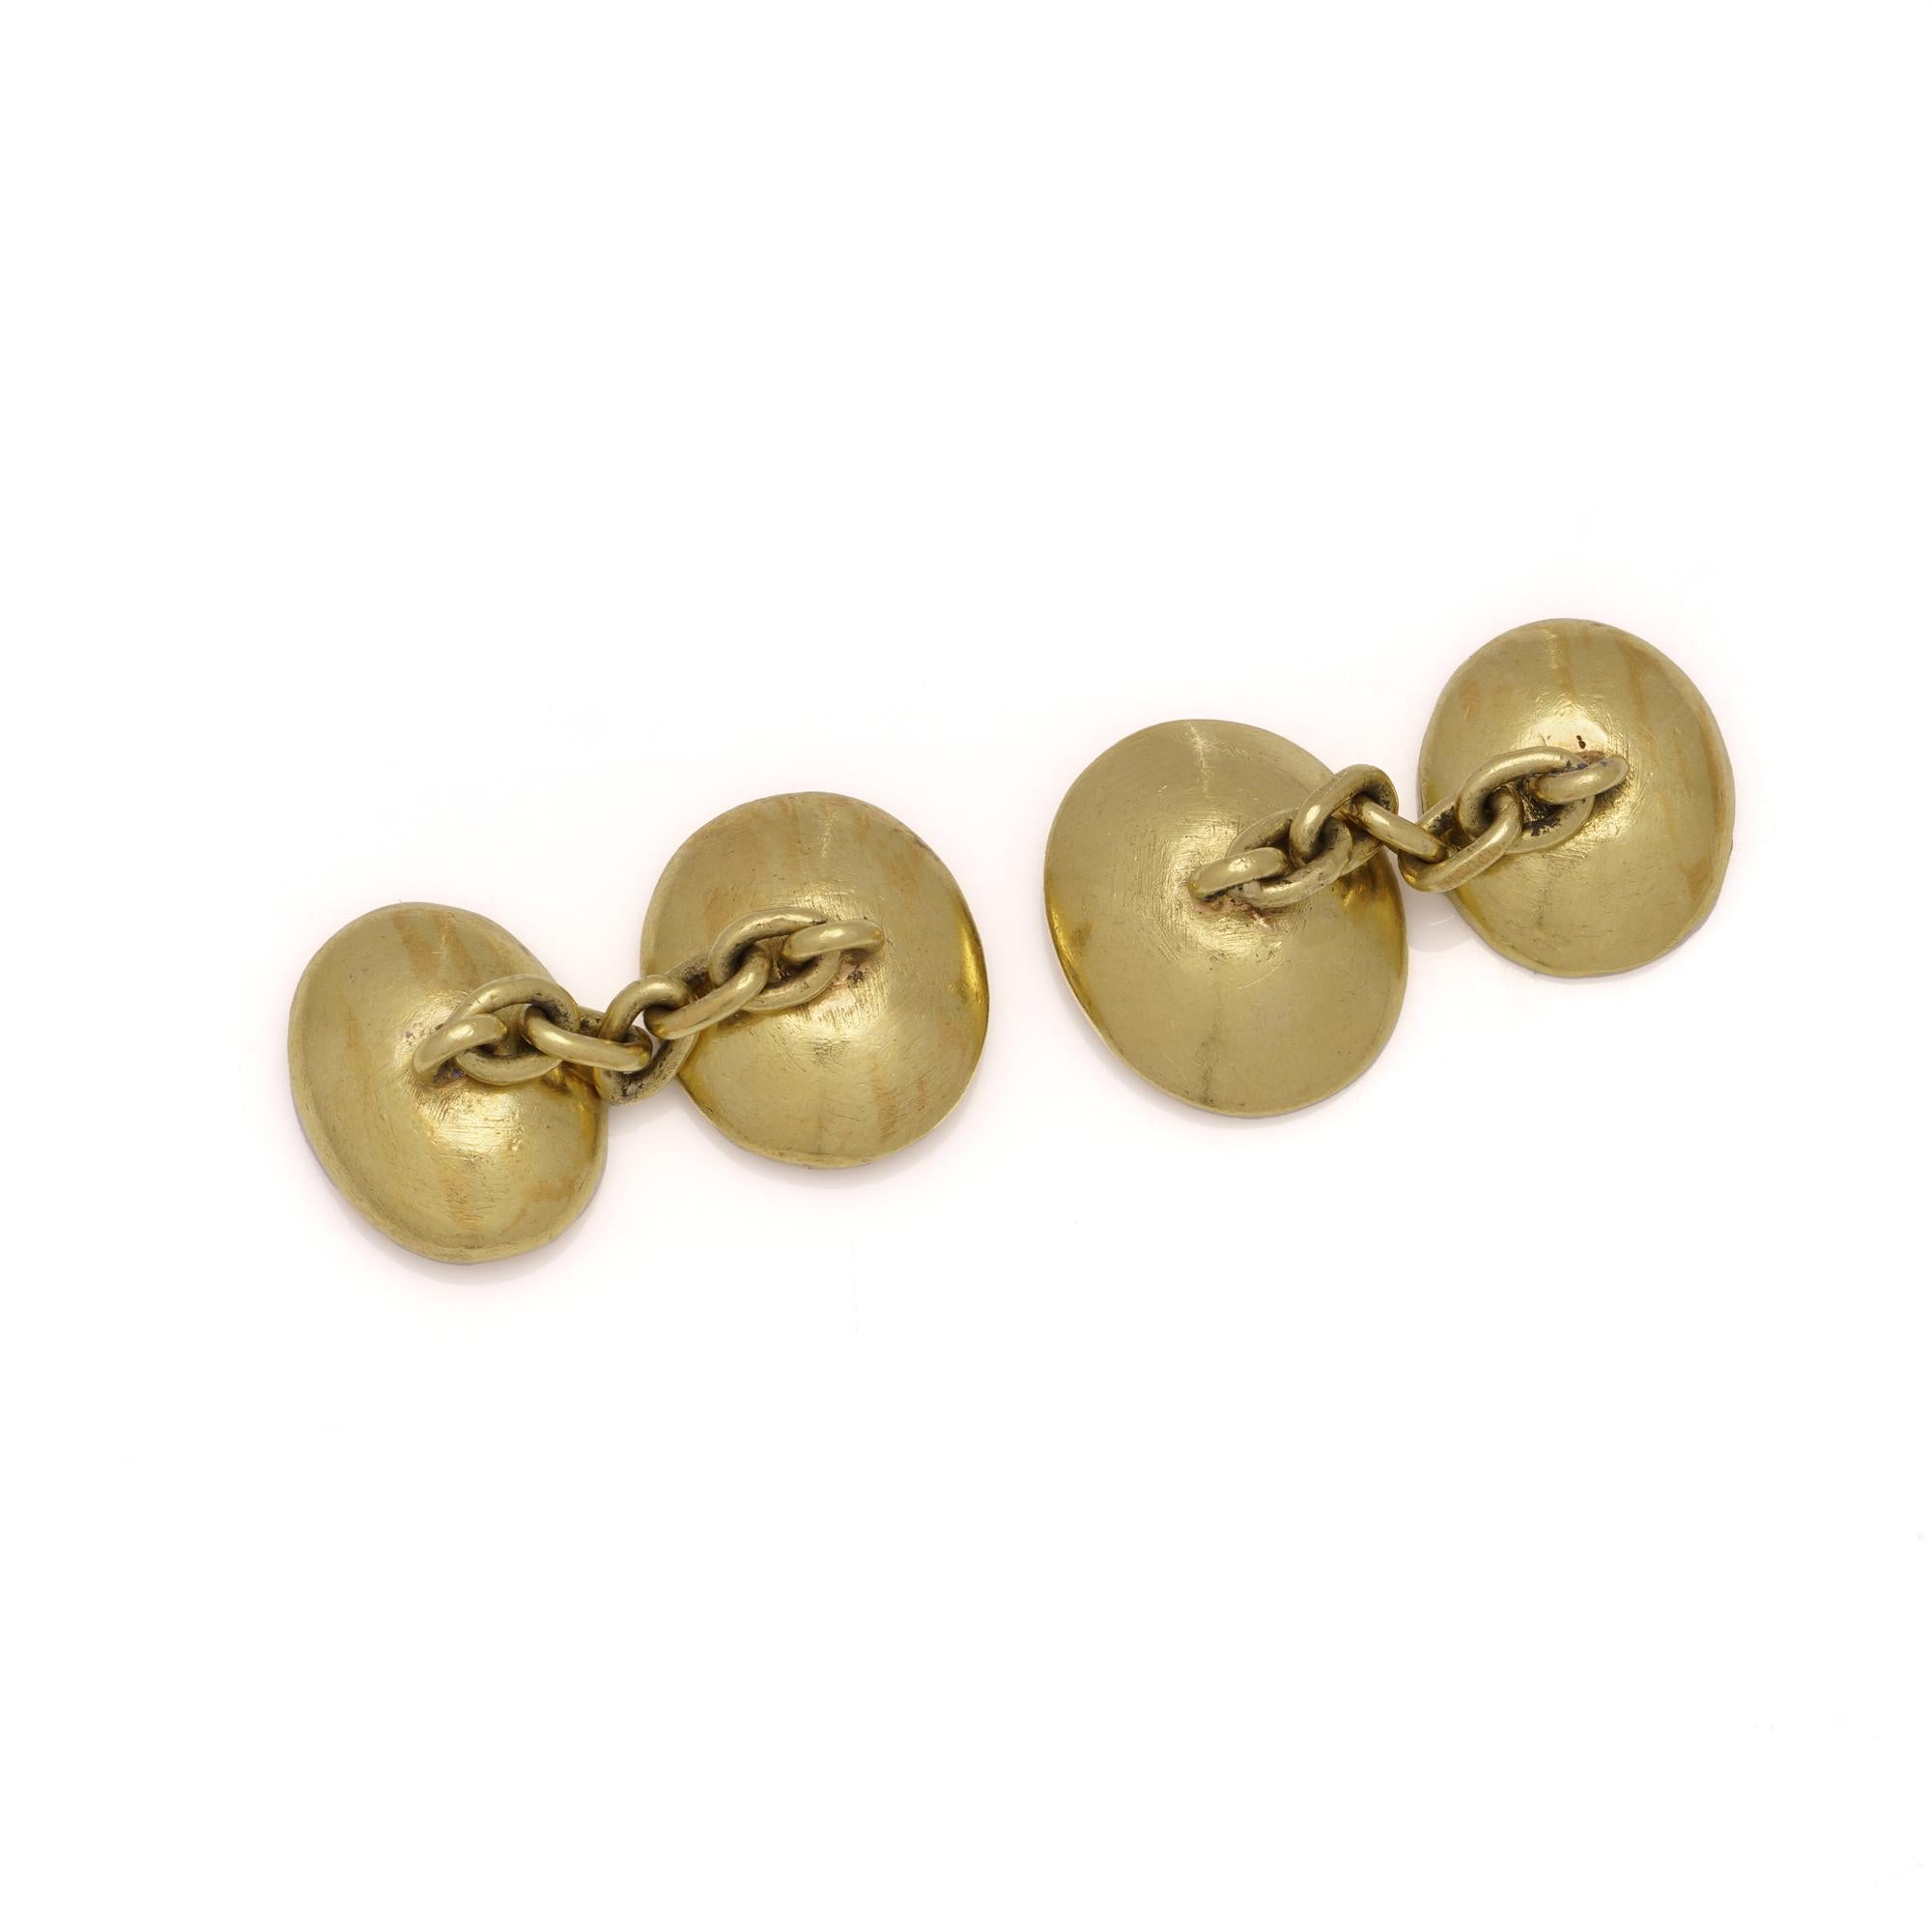 Antique 22kt yellow gold cufflinks, each adorned with Roman 4 carved hardstone For Sale 1